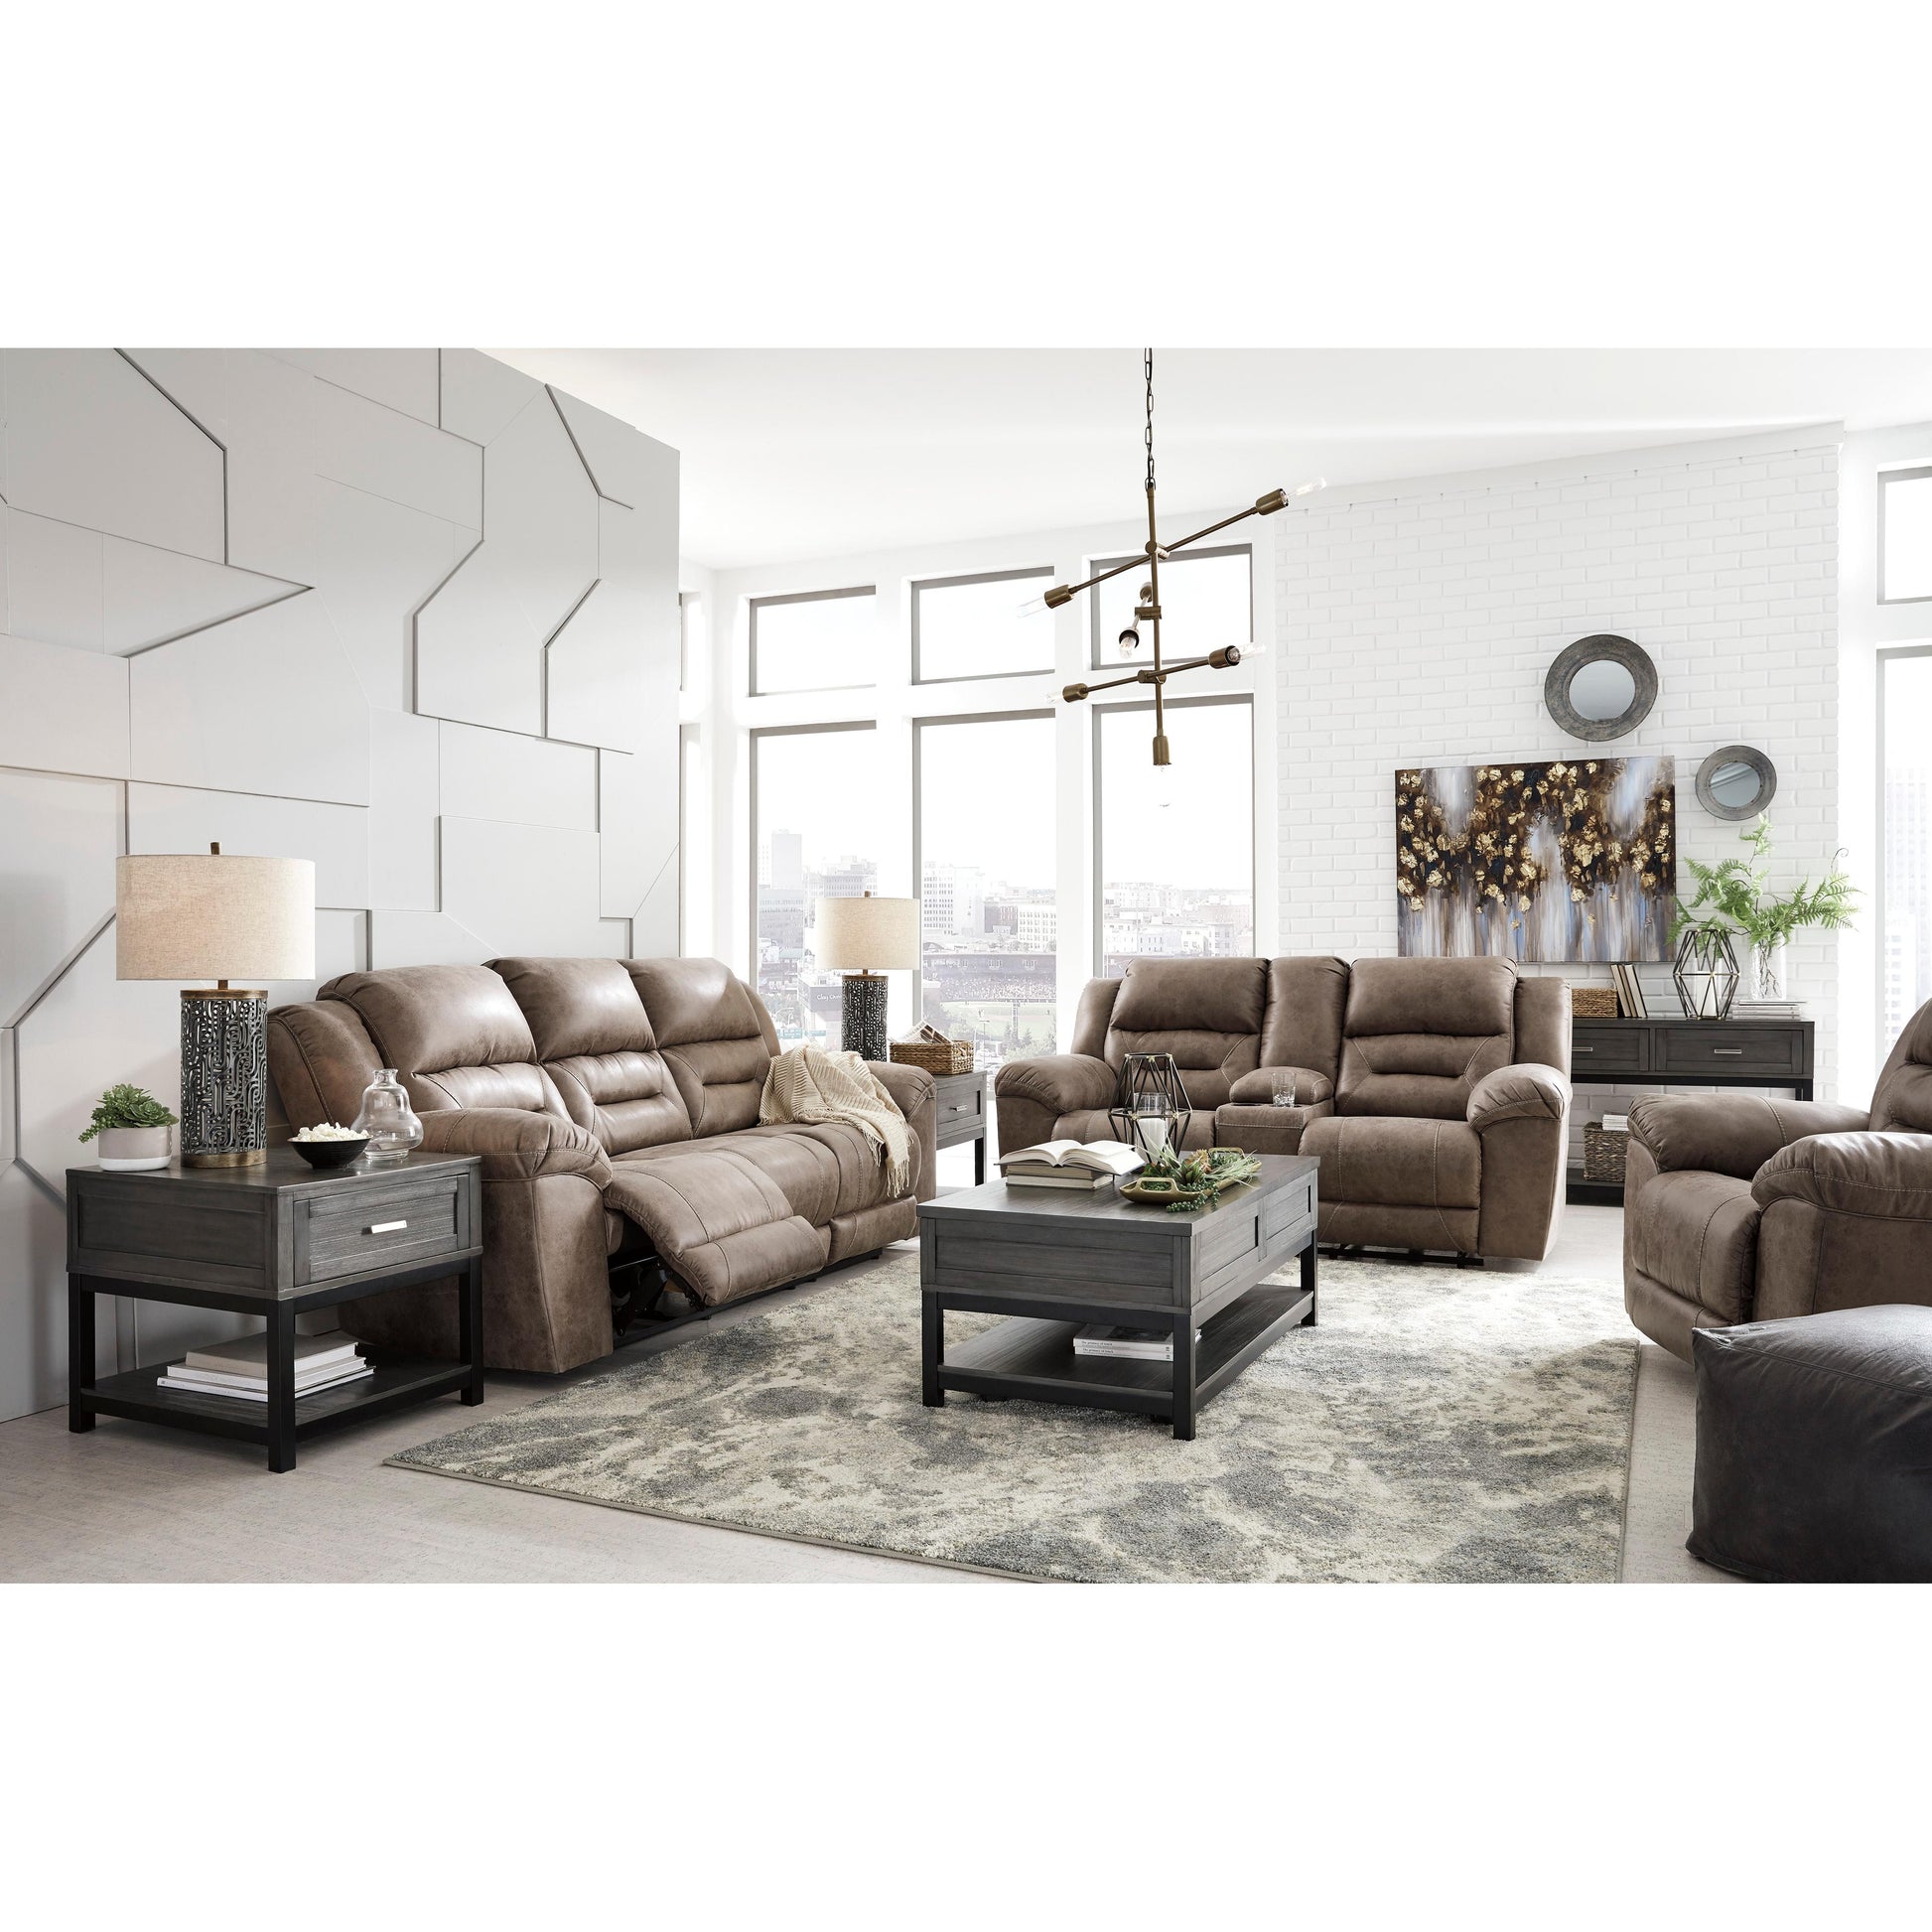 Signature Design by Ashley Stoneland Reclining Leather Look Loveseat 3990594